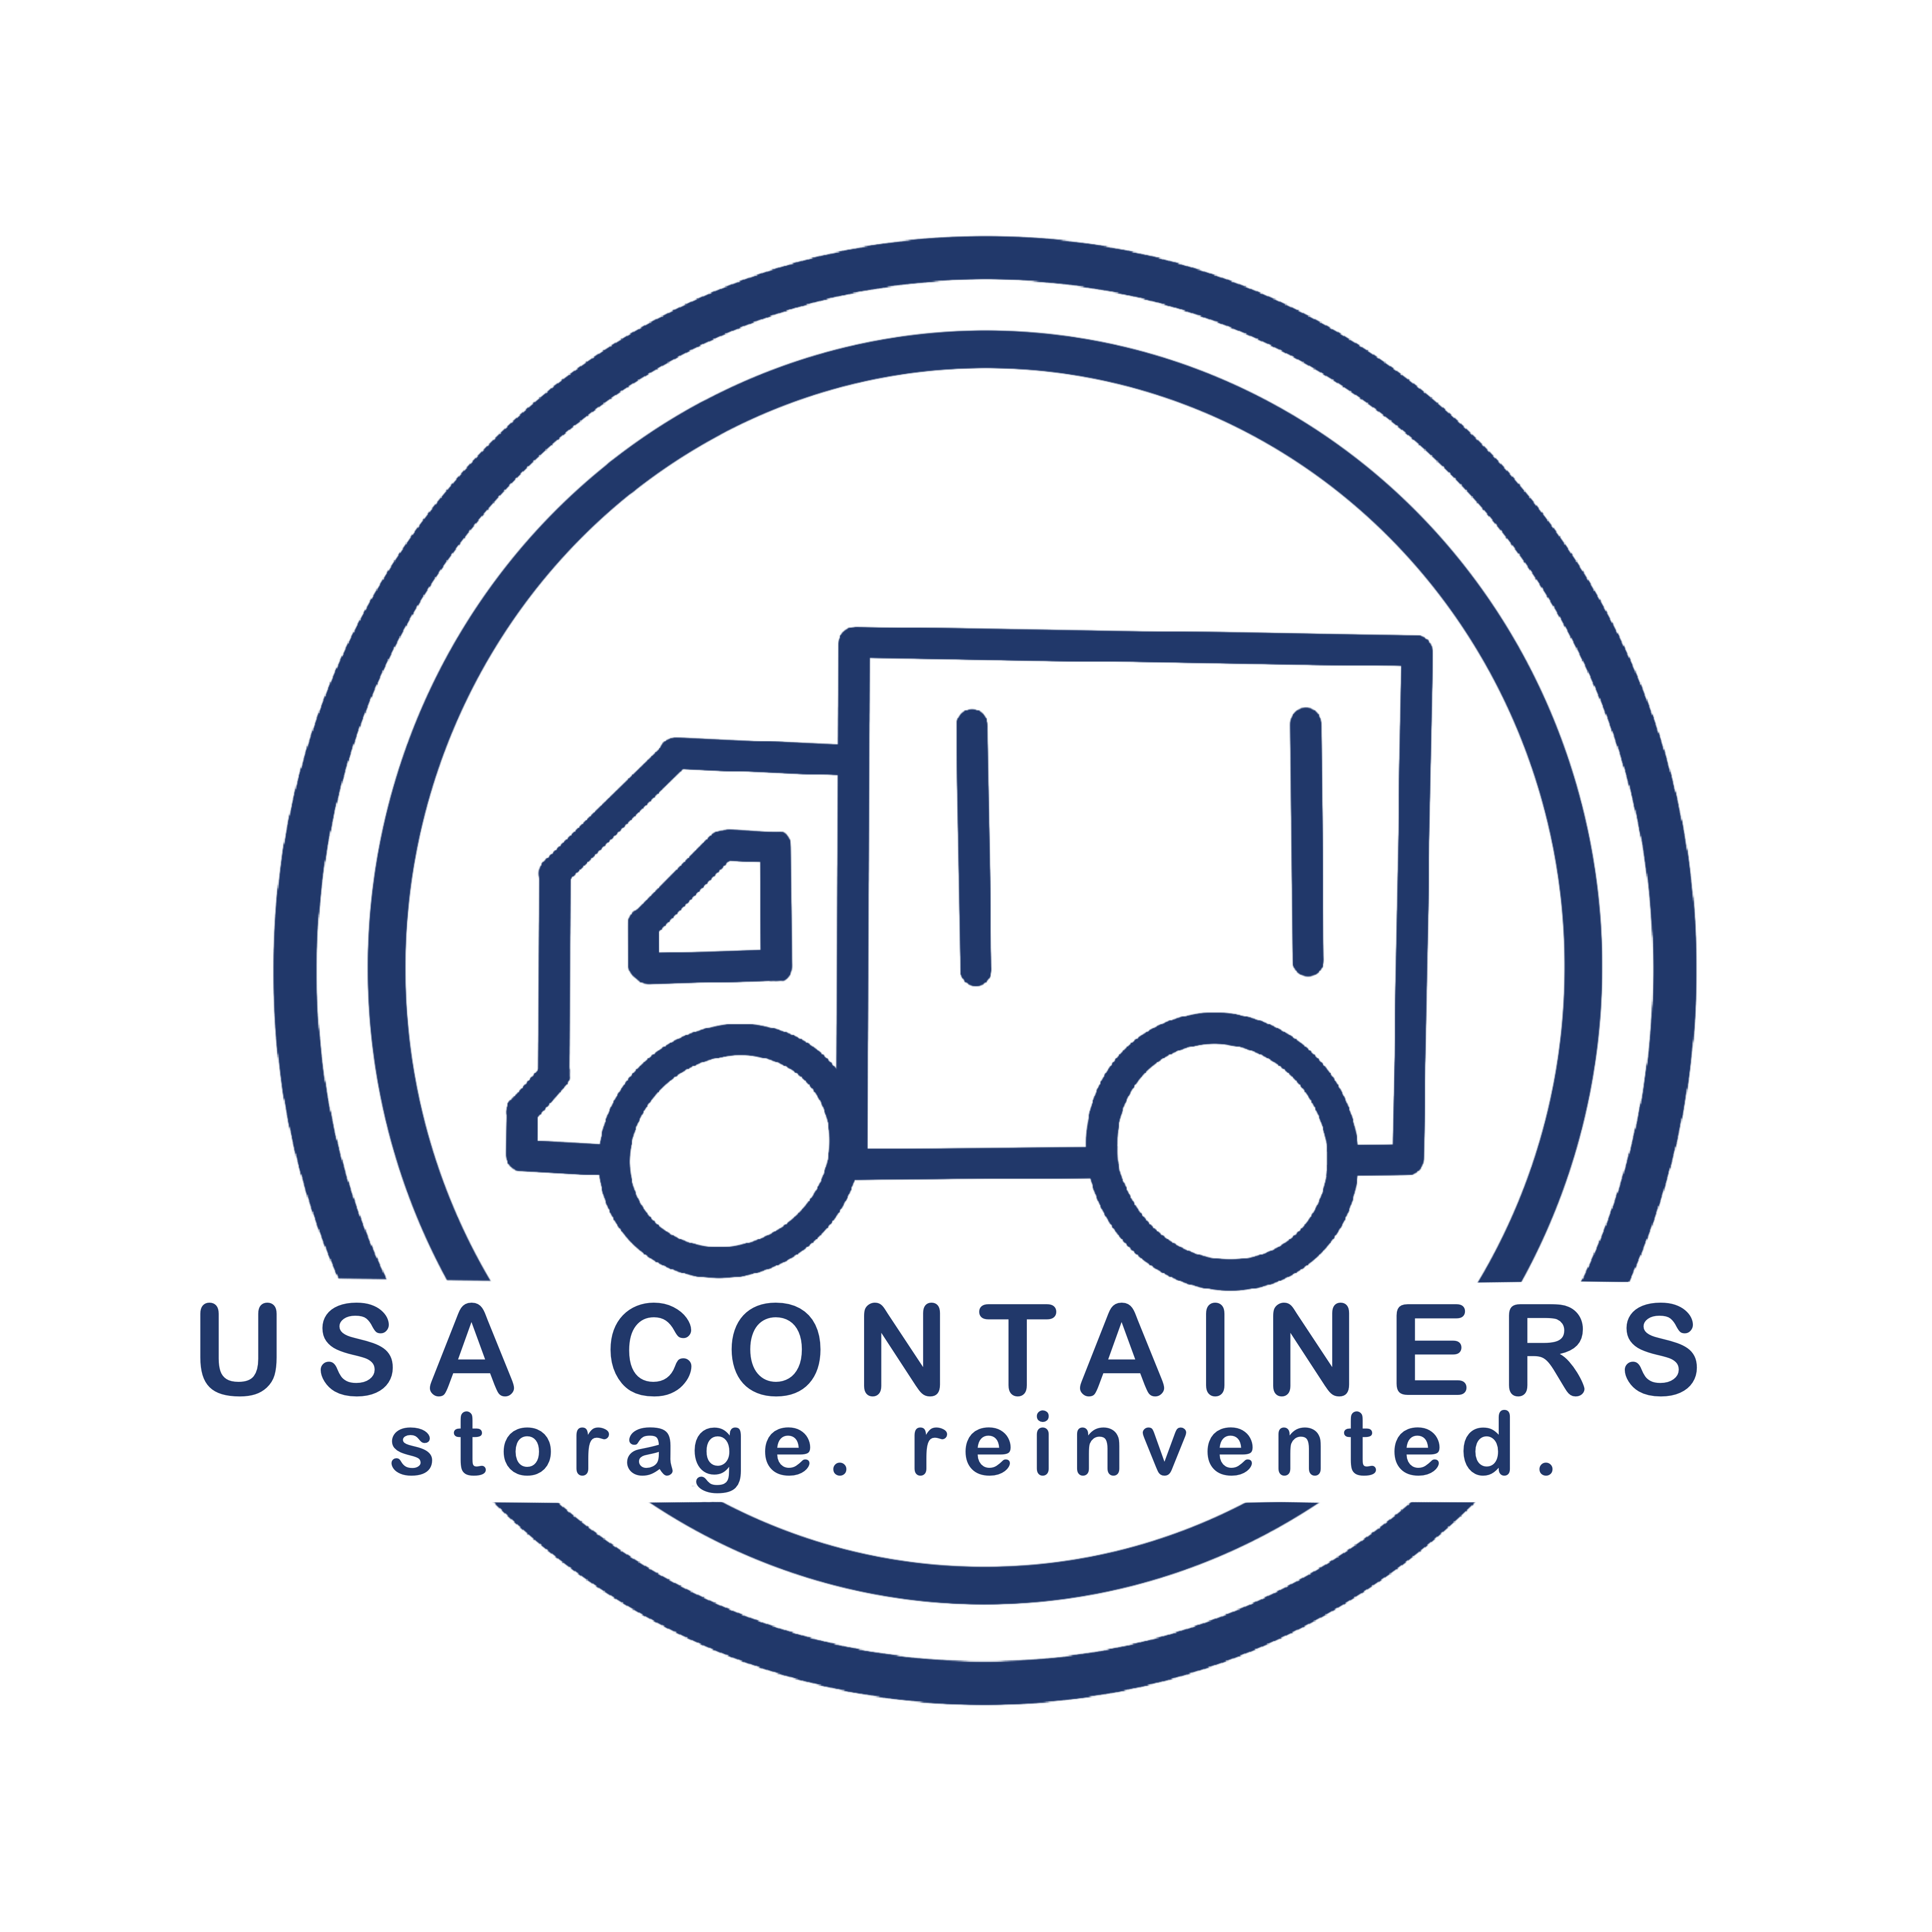 USA Containers